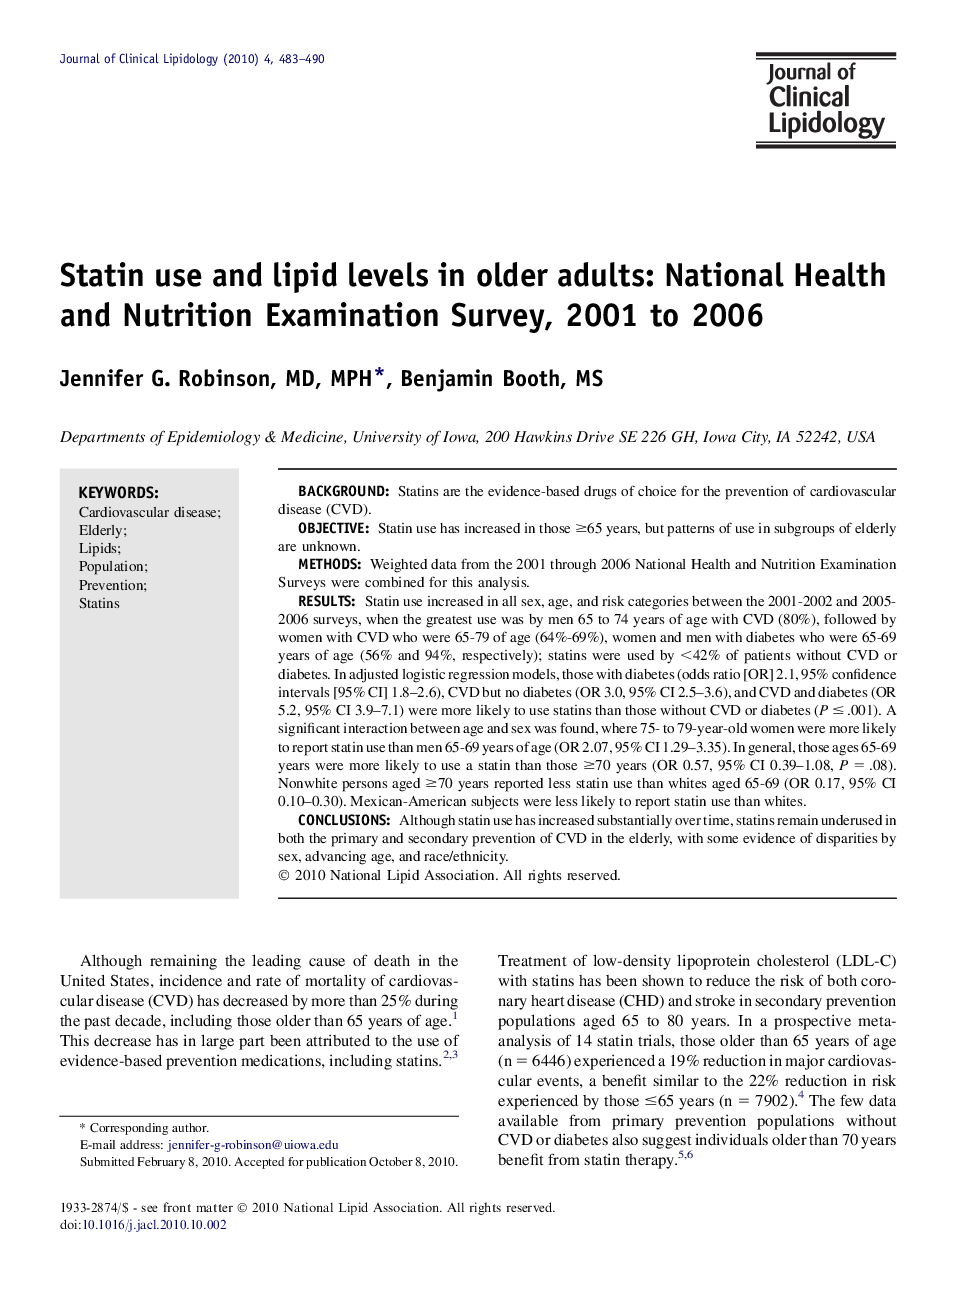 Statin use and lipid levels in older adults: National Health and Nutrition Examination Survey, 2001 to 2006